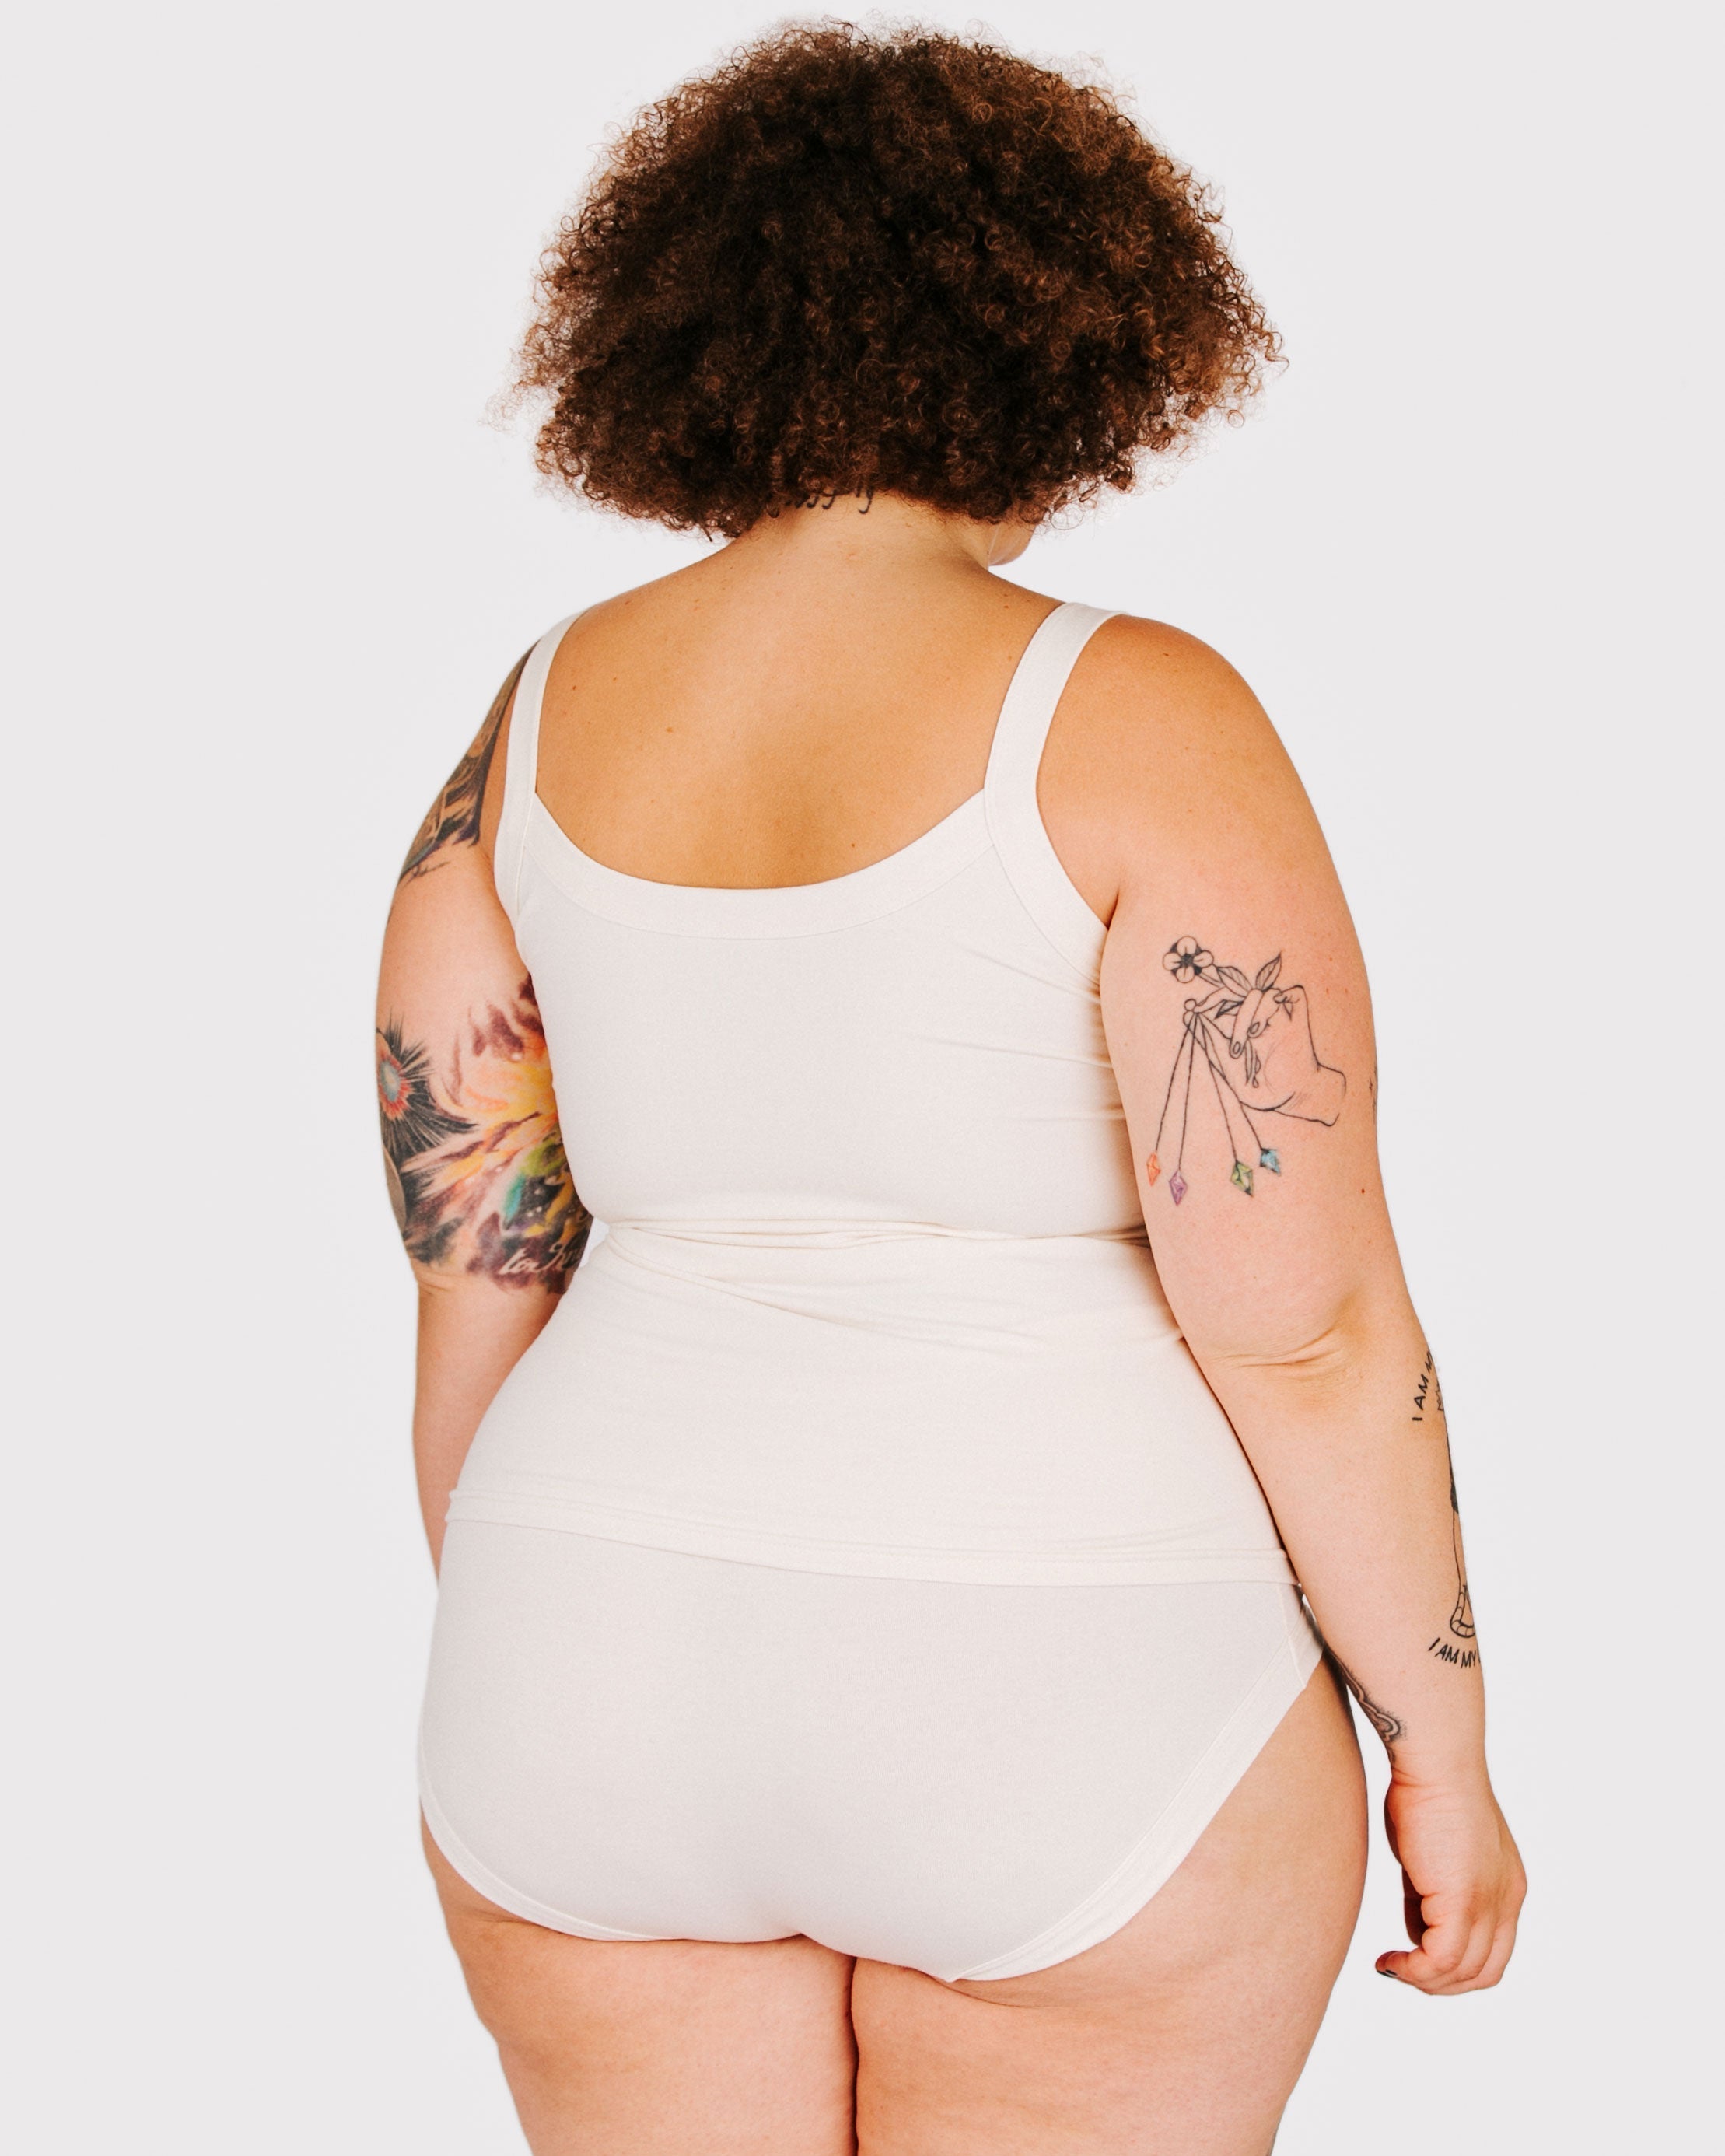 Fit photo from the back of Thunderpants organic cotton Camisole and Hipster style underwear in off-white, showing a wedge-free bum, on a model.